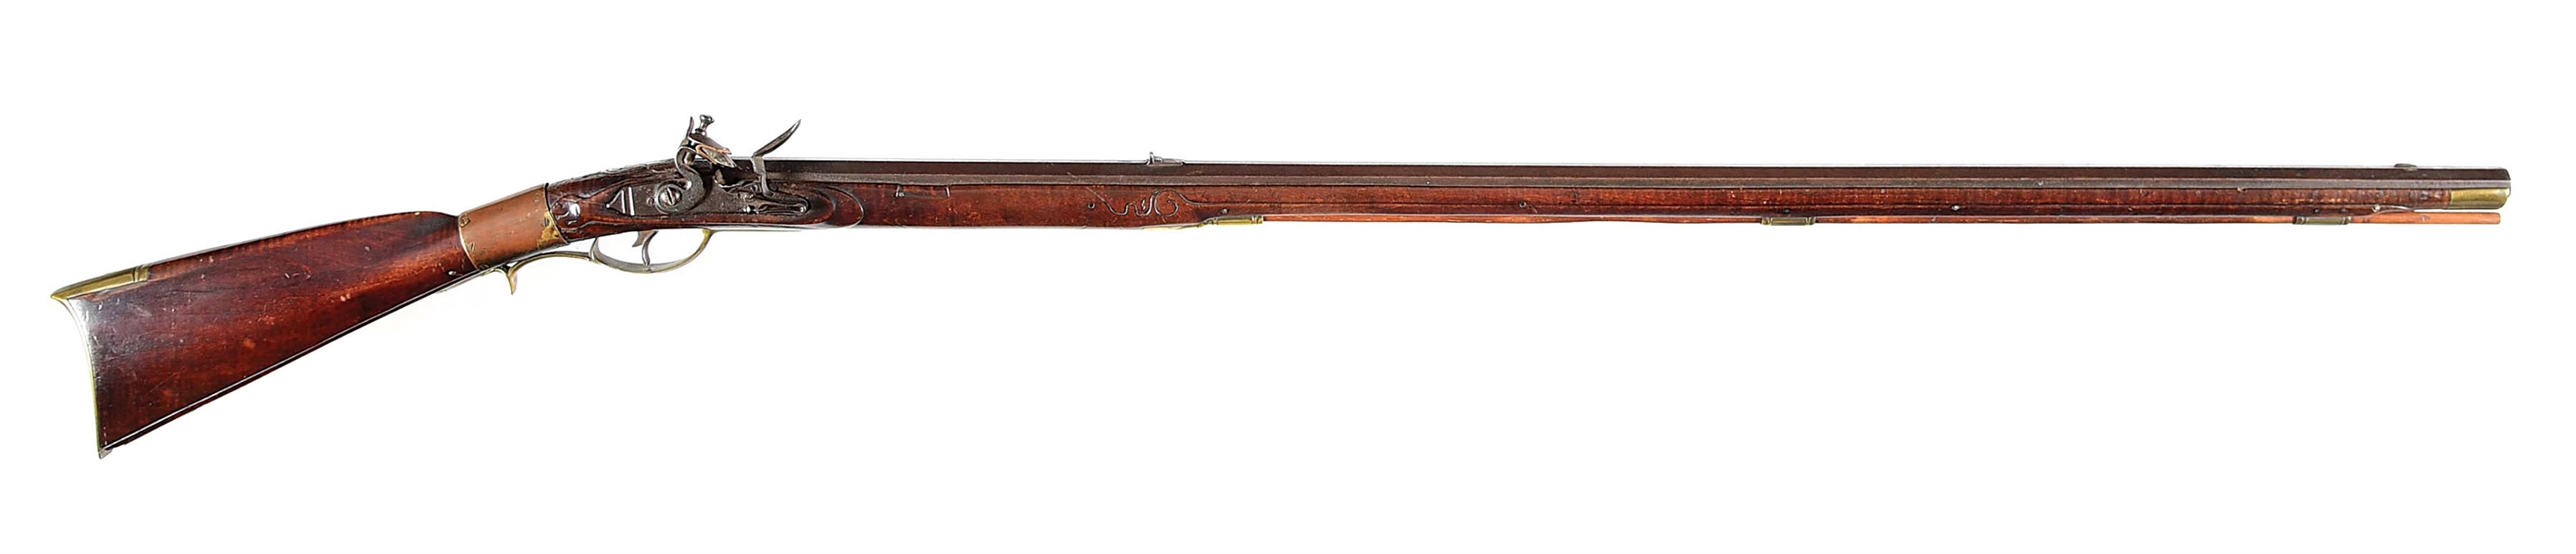 (A) UNTOUCHED KENTUCKY RIFLE ATTRIBUTED TO NICHOLAS BEYER.